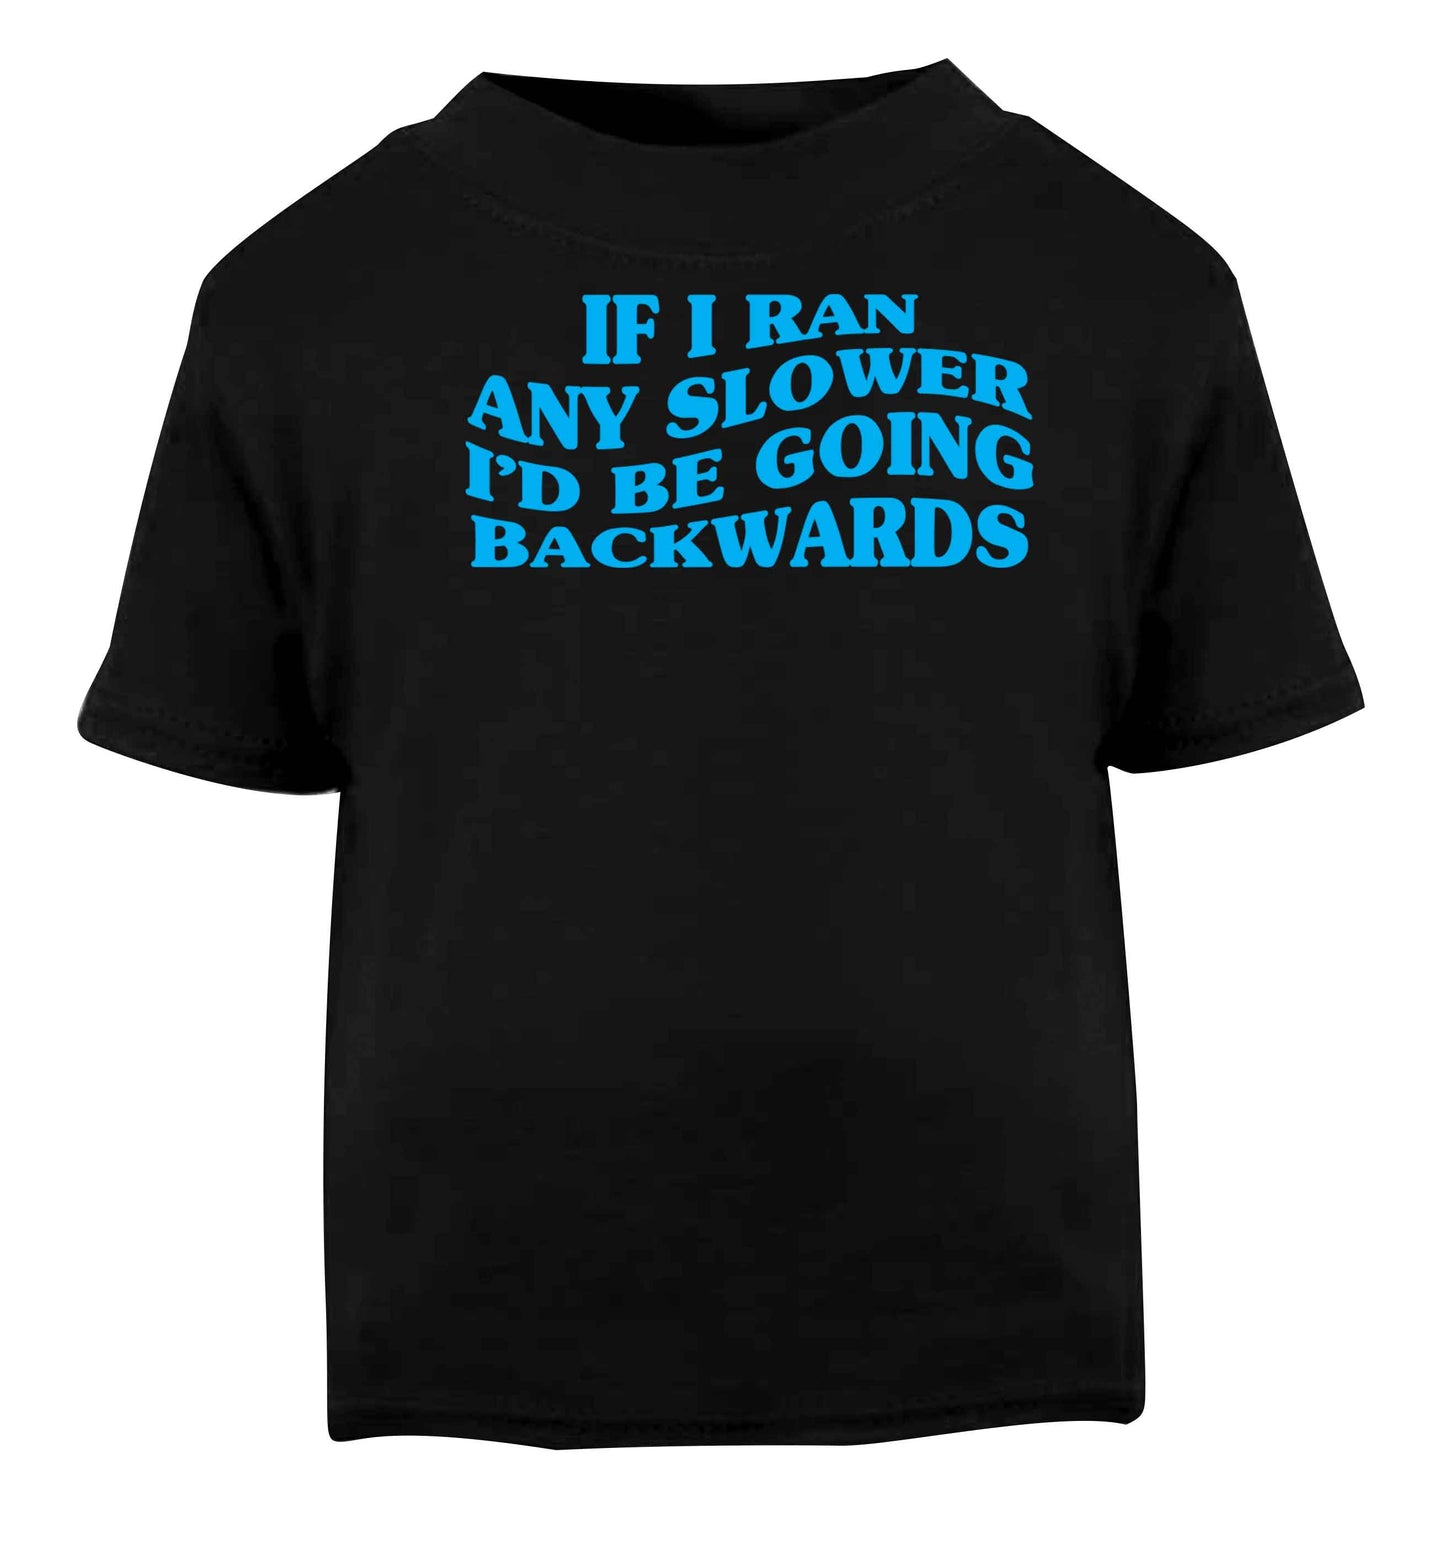 If I ran any slower I'd be going backwards Black baby toddler Tshirt 2 years